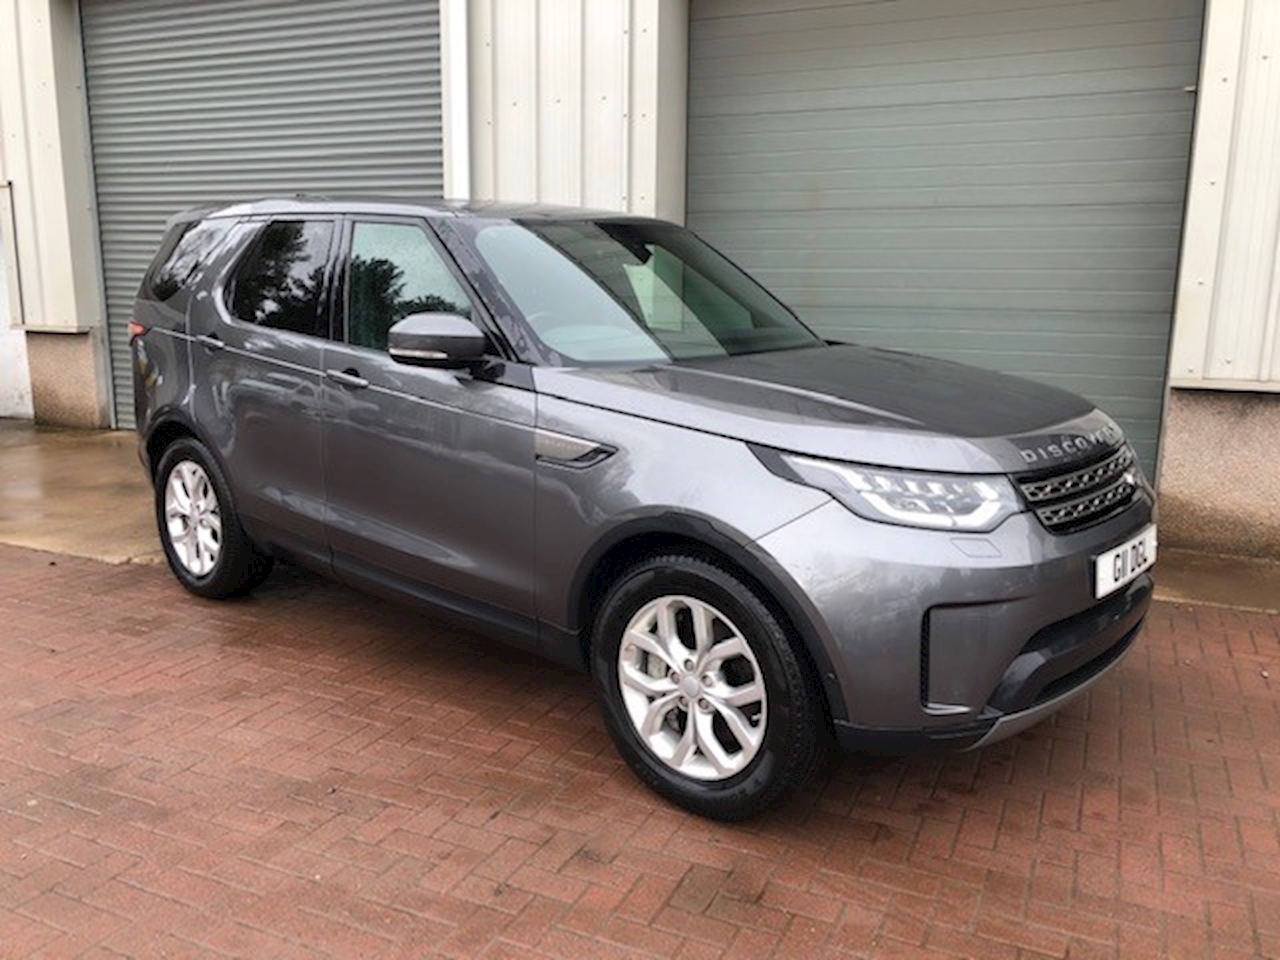 Discovery Sdv6 Commercial Se Panel Van 3.0 Automatic Diesel